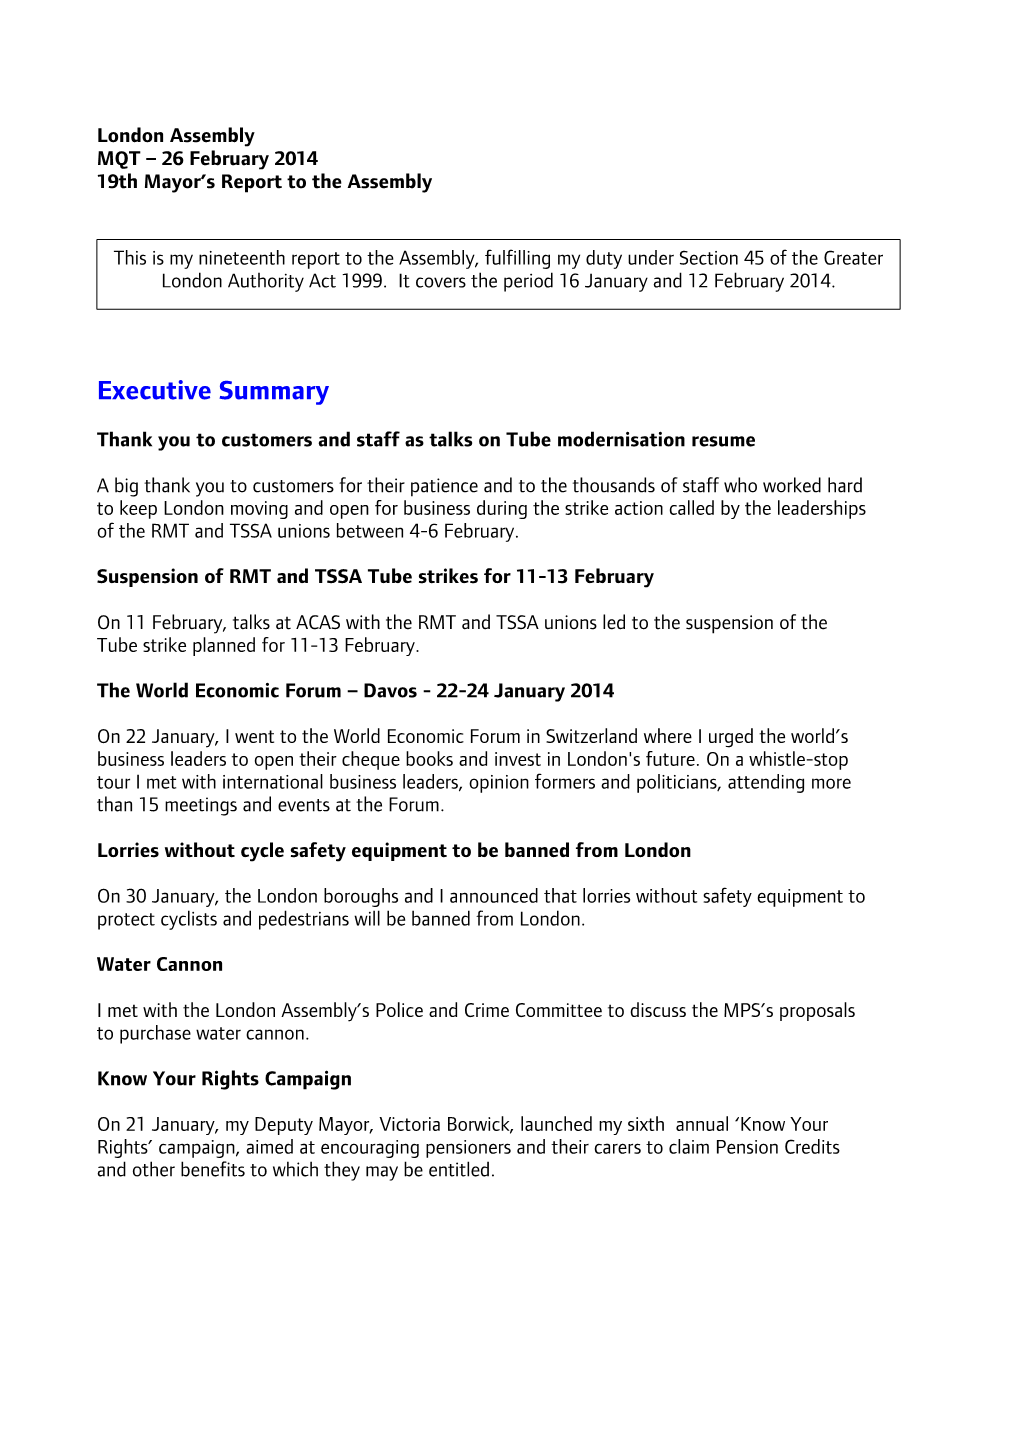 London Assembly MQT – 26 February 2014 19Th Mayor’S Report to the Assembly